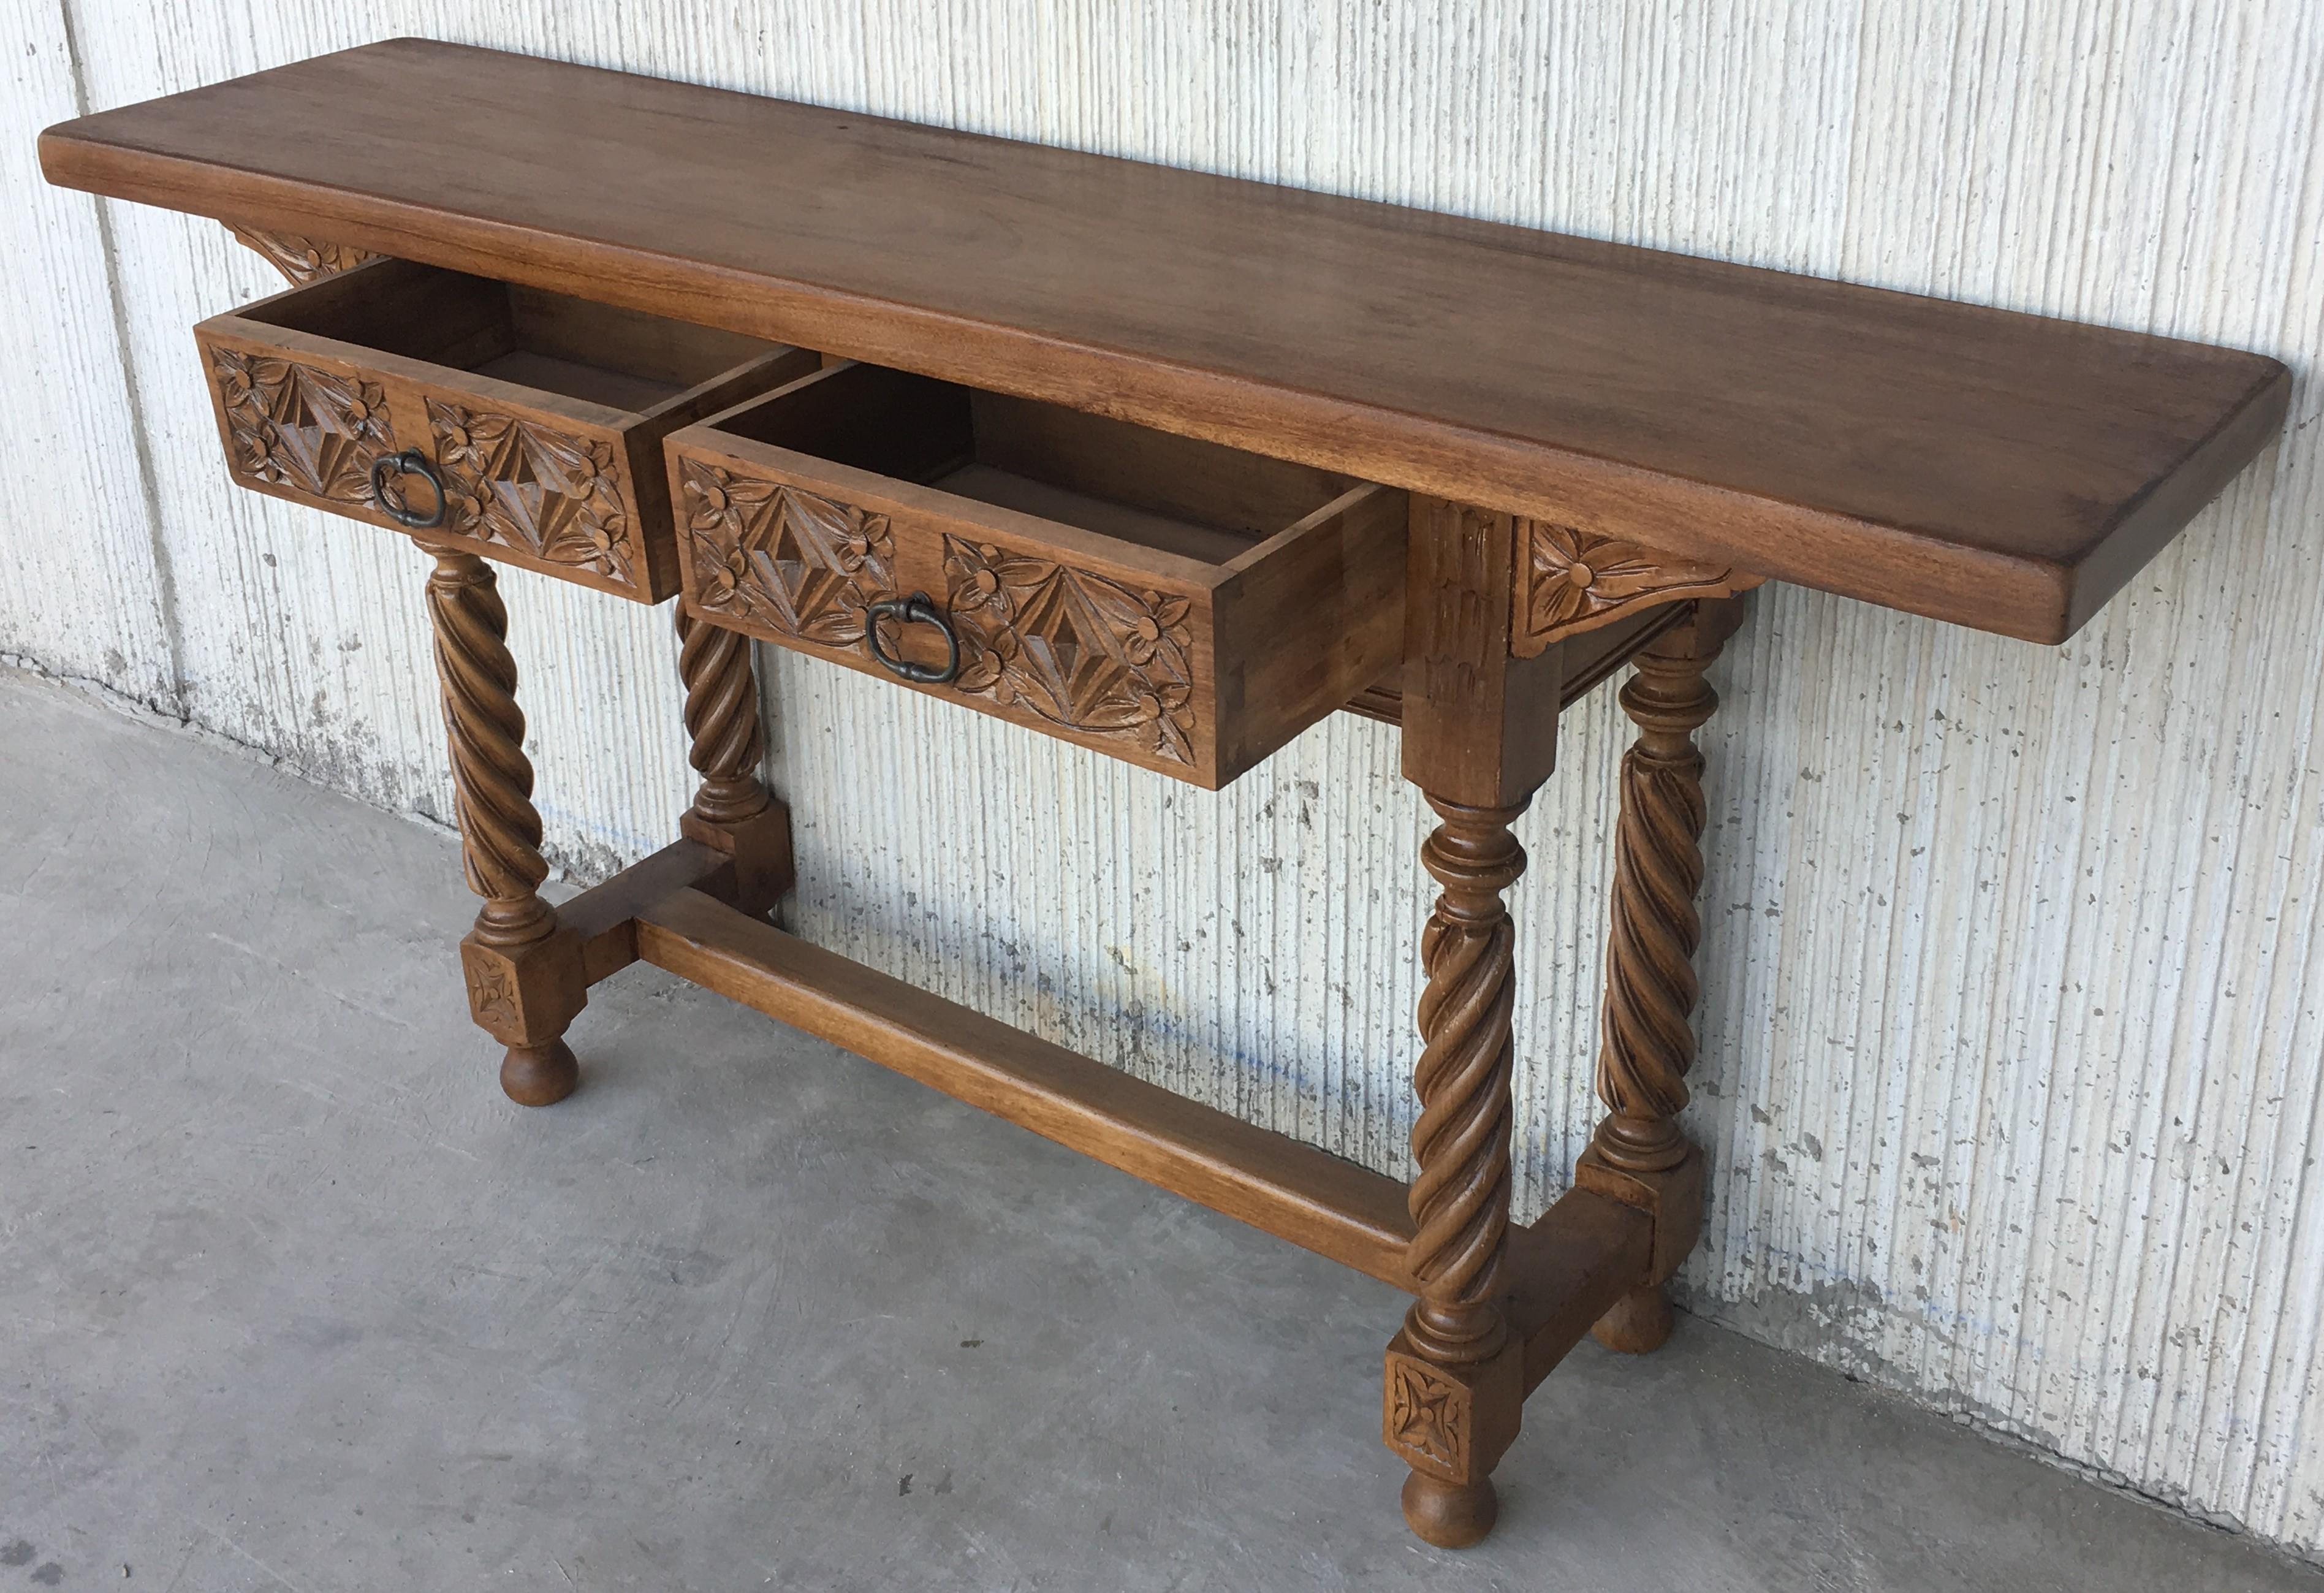 18th Century Spanish Catalan Carved Console Table with Two Drawers (Spanisch)